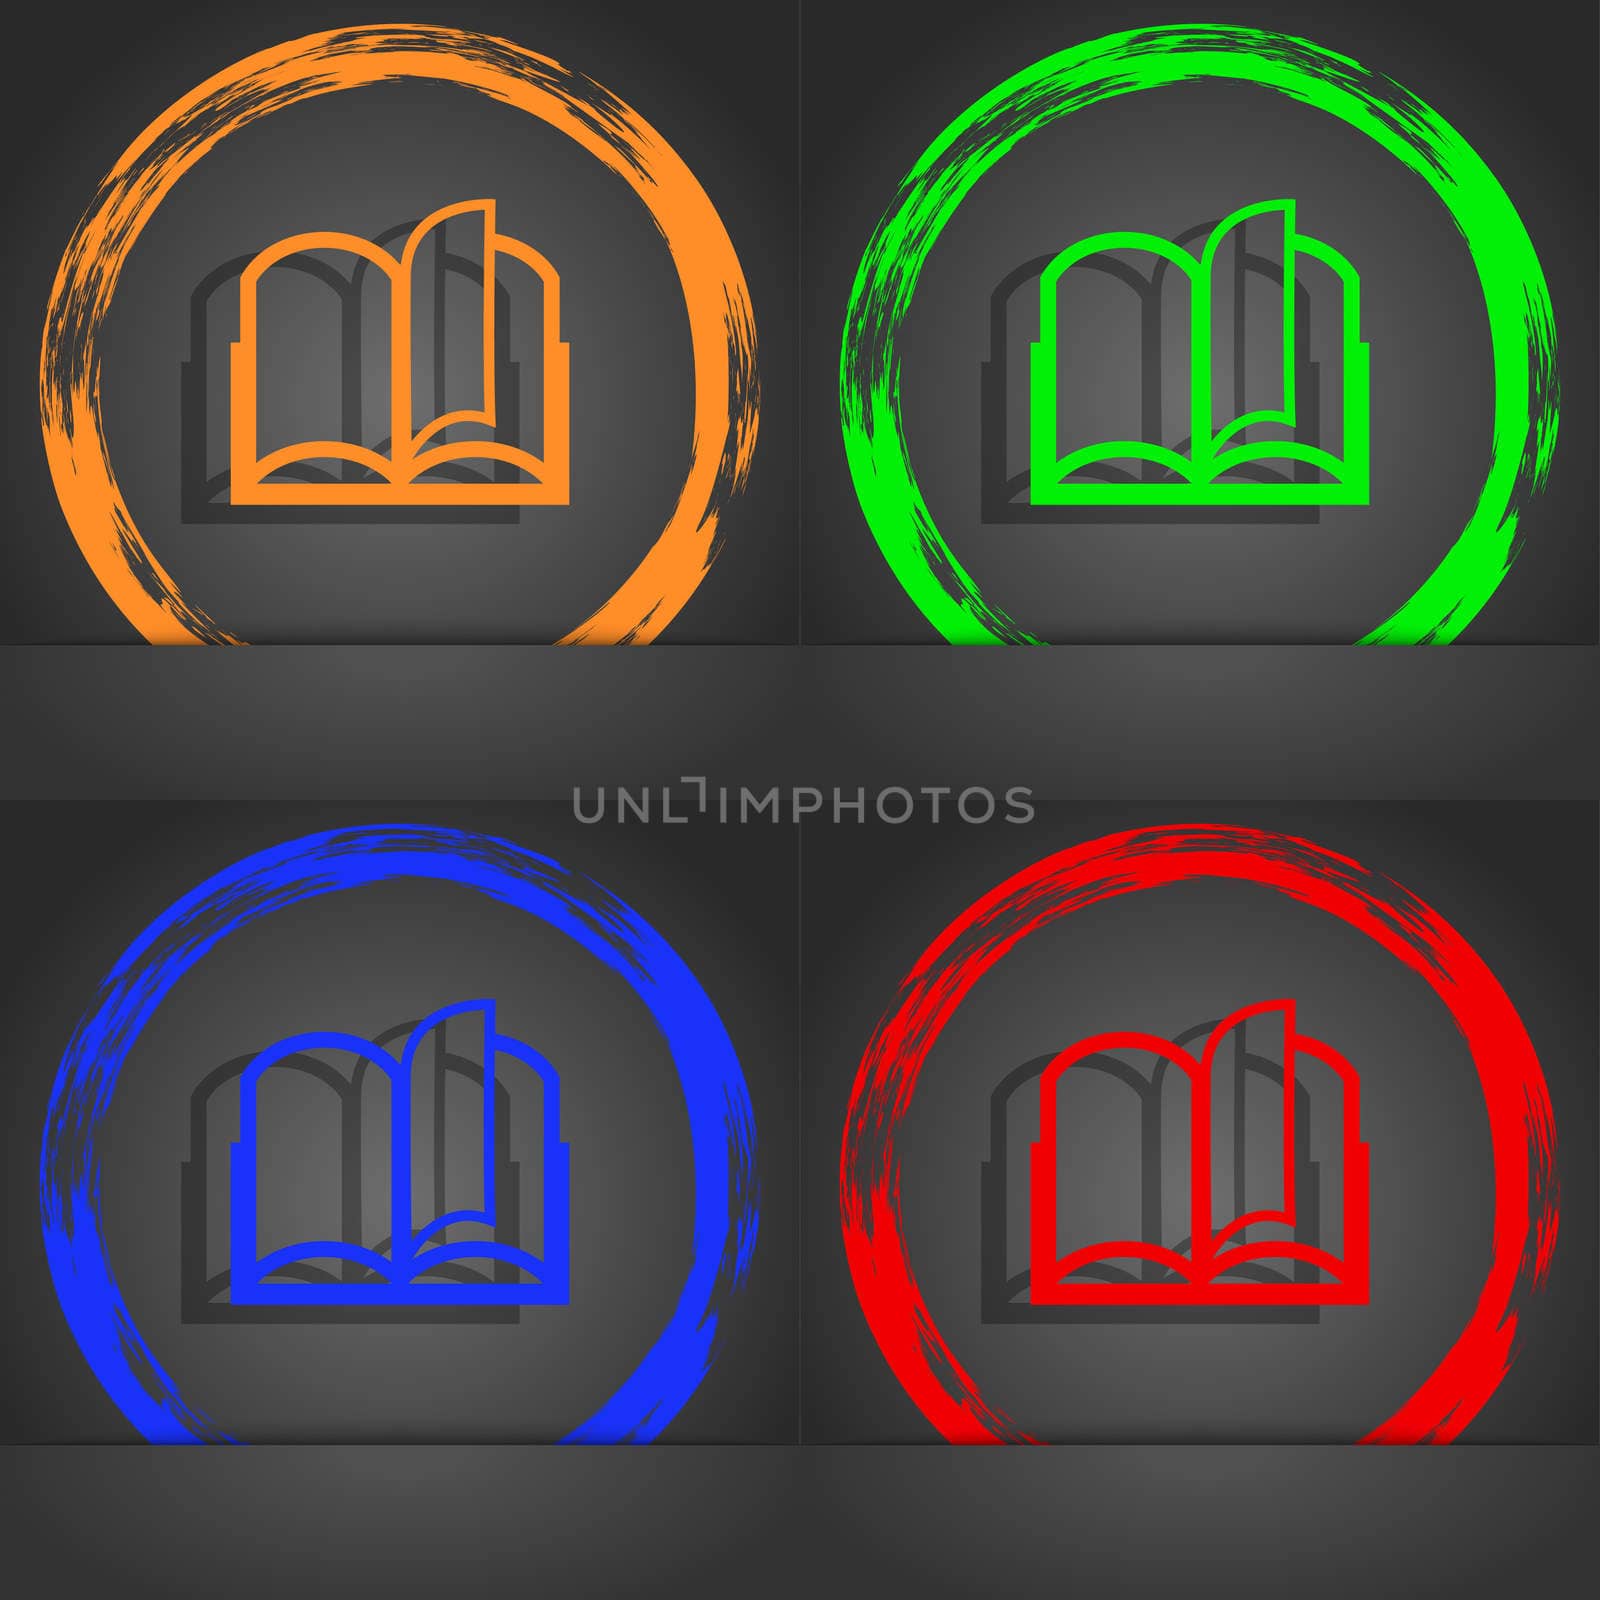 Book sign icon. Open book symbol. Fashionable modern style. In the orange, green, blue, red design. illustration